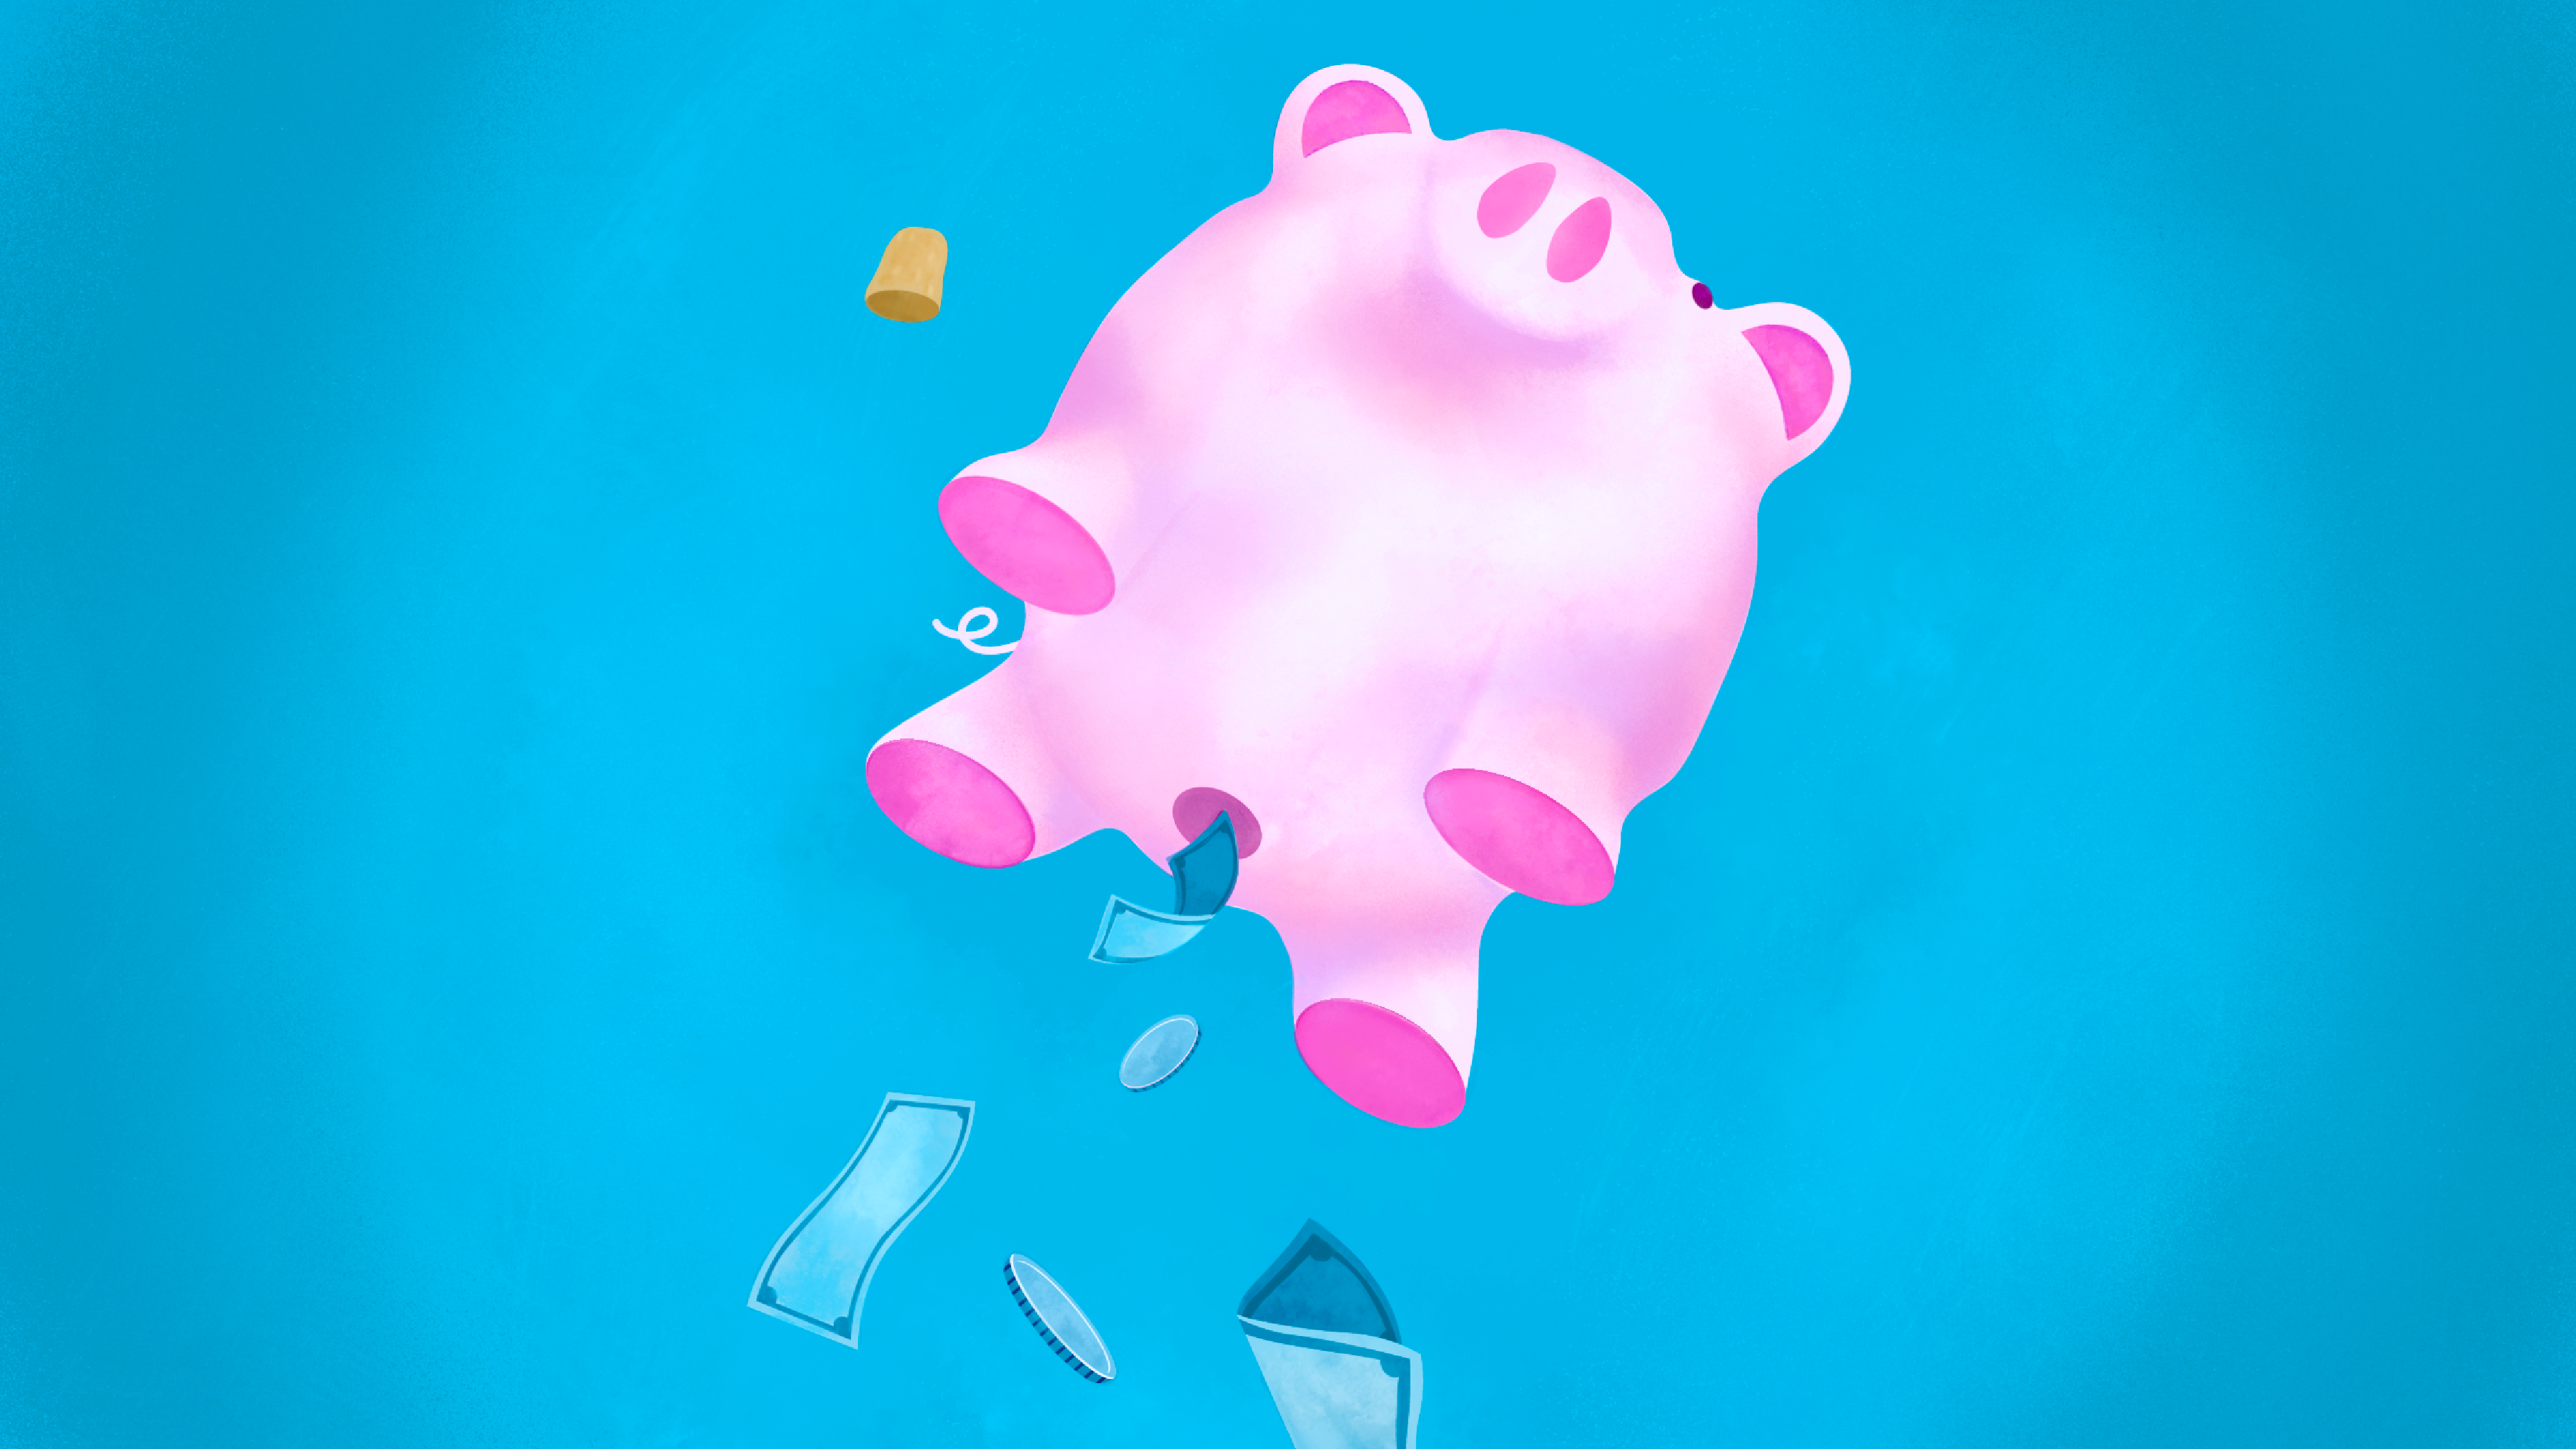 Illustration of a floating piggy bank with cash and coins falling out from the bottom and a floating cork.